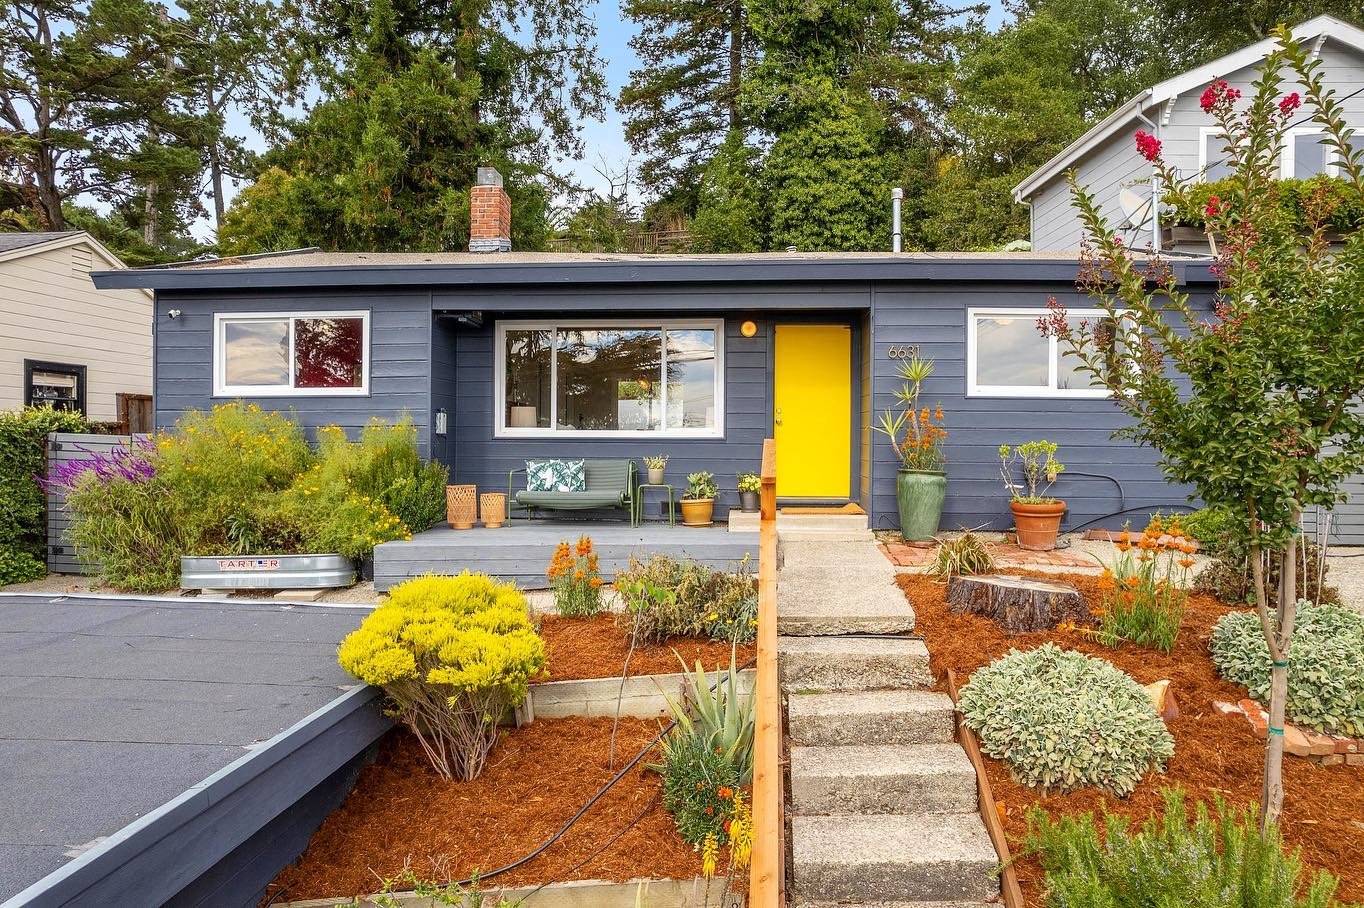 PENDING! ✨ 💛 
As @spruceandpinehouse predicted, this cute thing sold in a hot minute. Buyers and sellers bonded and aligned in their mutual love of this fresh-air mod-cottage in the hills of Montclair.
&hellip;

@theagencynorcal 
@diasporaco 
@lovea